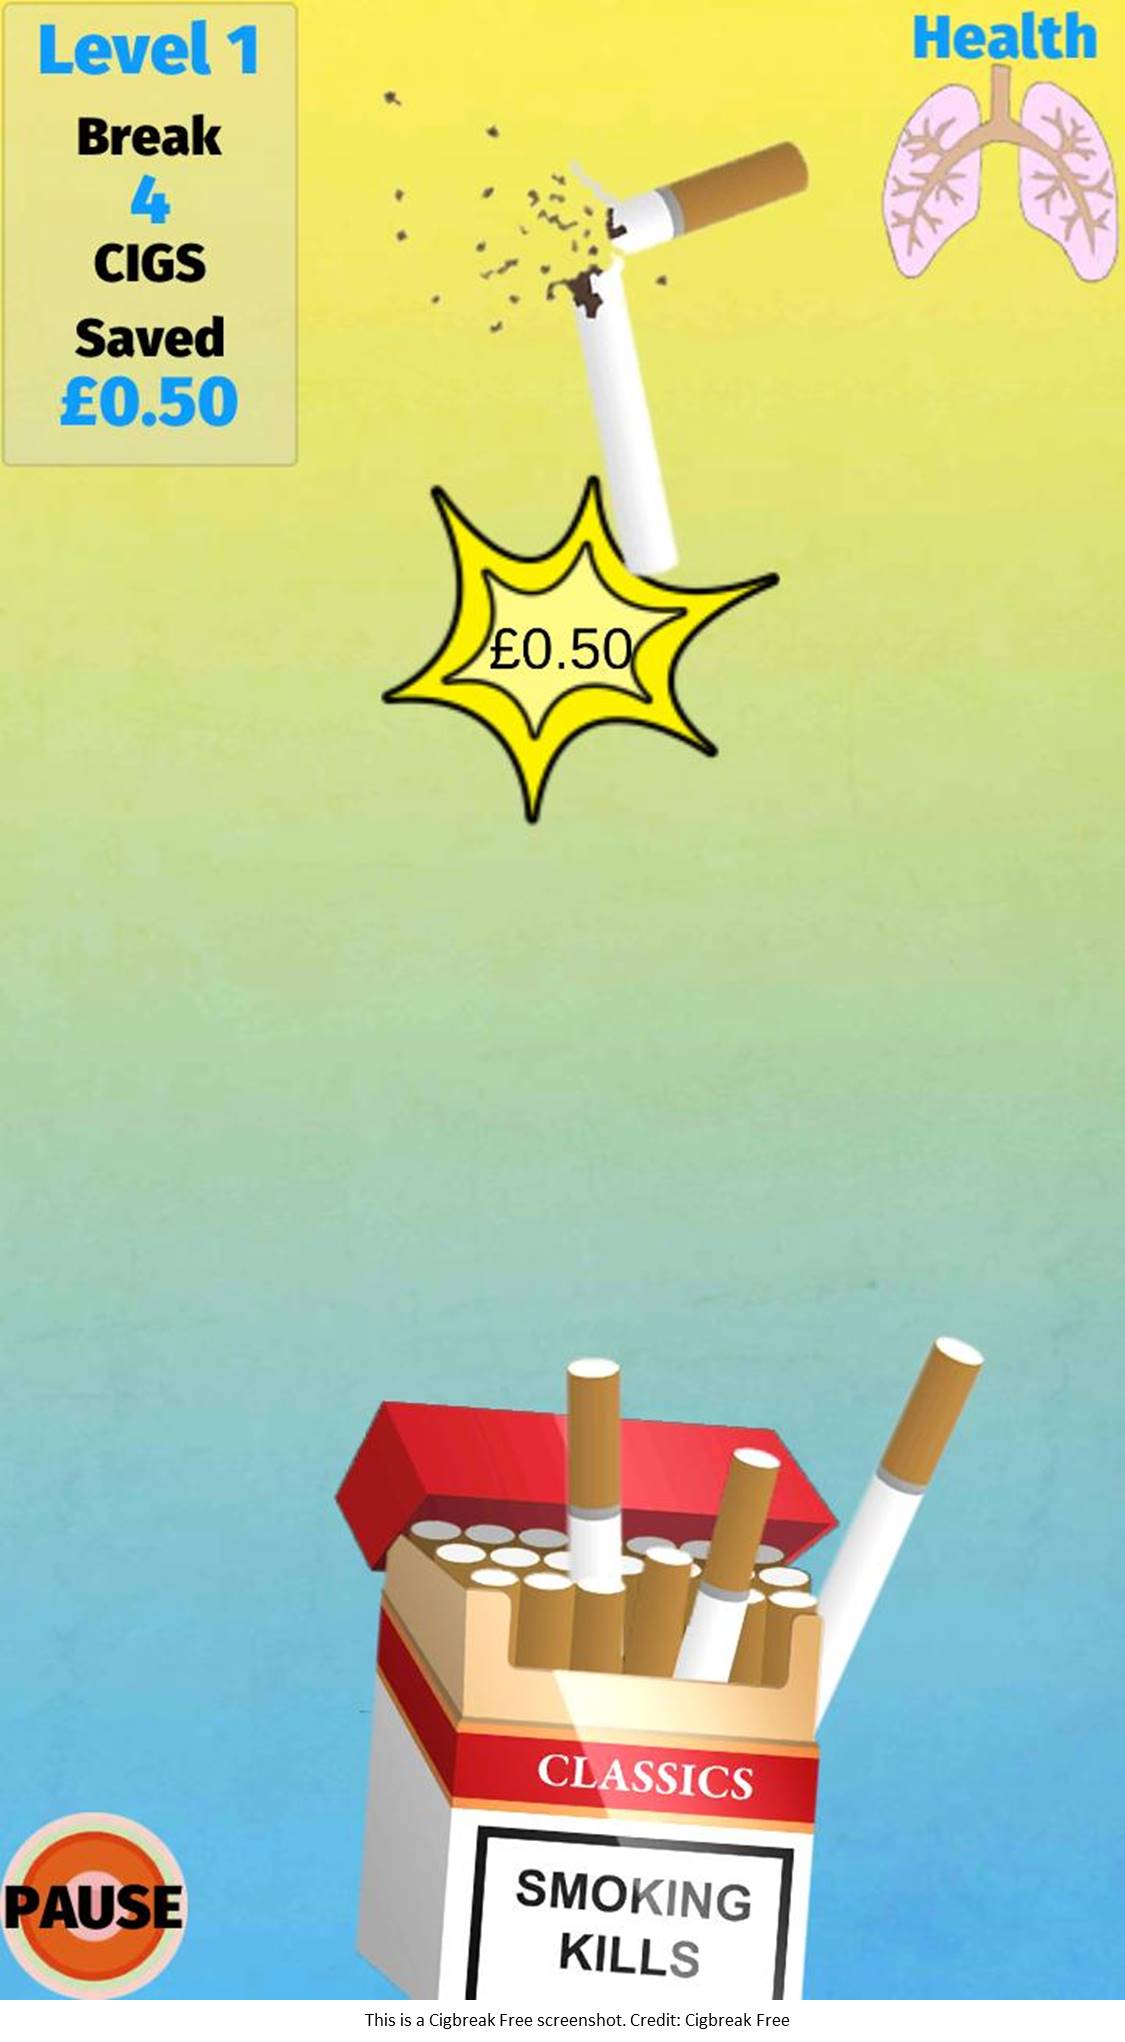 A new app to help smokers quit